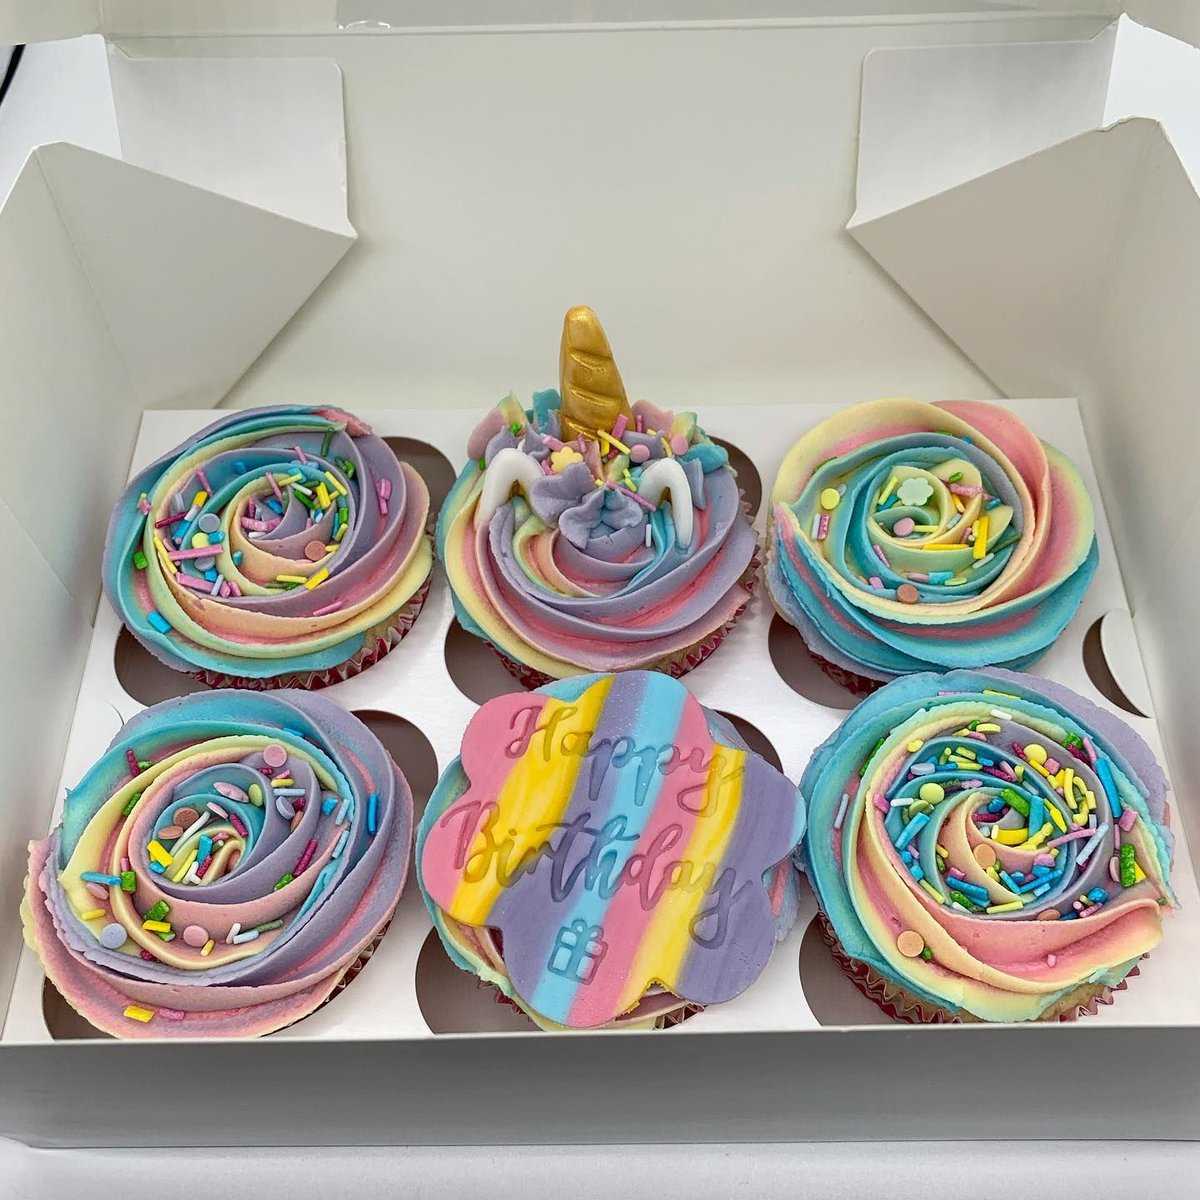 Cake! Check out our 17 places offering cake or bakery delivery in Edinburgh: buff.ly/2XdrIhi
With @TastyBunsBakery @KiltedDonut @zest_edinburgh @MarlenkaEnt @3dcakesuk @CuckoosBakery @hellolovecrumbs @AbbisPantry and more!